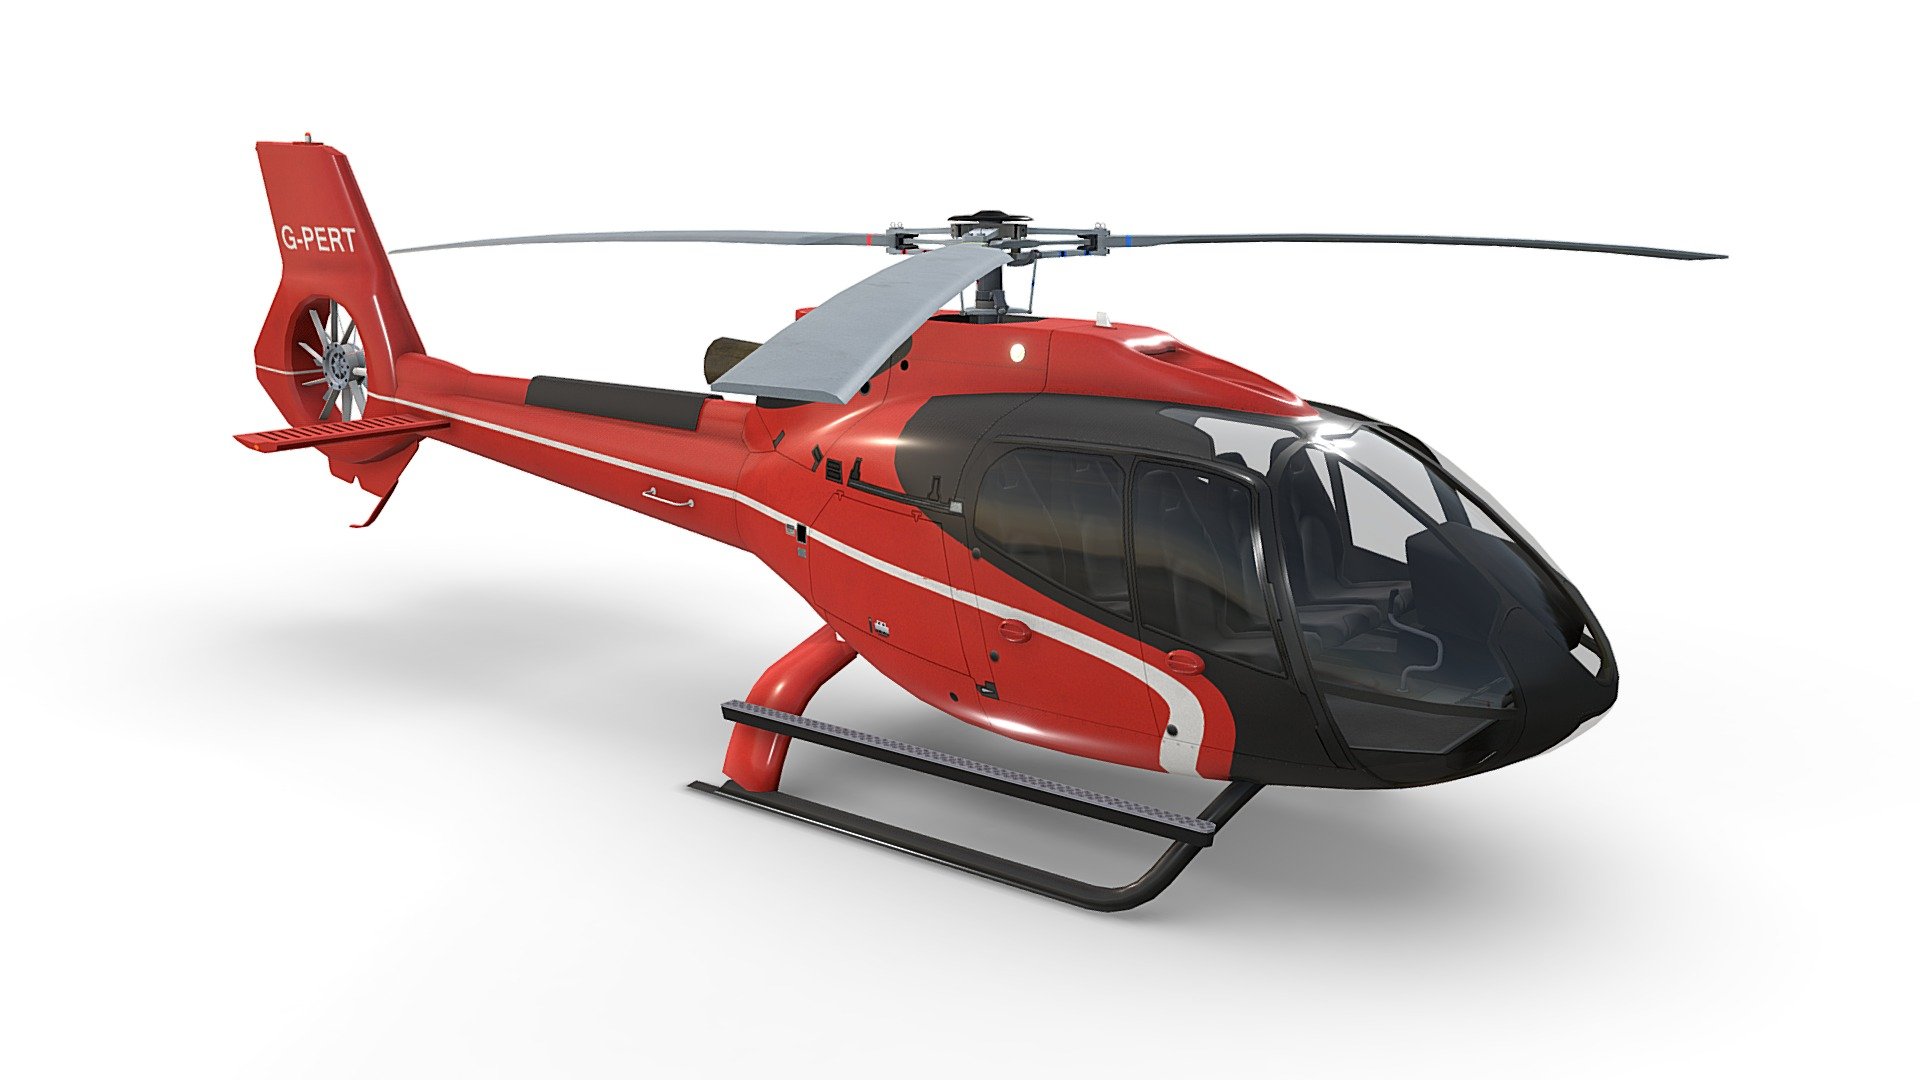 Generic Helicopter Airbus H130 Livery 15. Game ready, realtime optimized Airbus Helicopter H130 with high visual accuracy. Both PBR workflows ready native 4096 x 4096 px textures. Clean lowpoly mesh with 4 preconfigured level of details LOD0 19710 tris, LOD1 10462 tris, LOD2 7388 tris, LOD3 5990 tris. Properly placed rotors pivots for flawless rotations. Simple capsule built interior that fits perfectly the body. 100% human controlled triangulation. All parts 100% unwrapped non-overlapping. Made using blueprints in real world scale meters. Included are flawless files .max (native 3dsmax 2014), .fbx, and .obj. All LOD are exported seperately and together in each file format 3d model